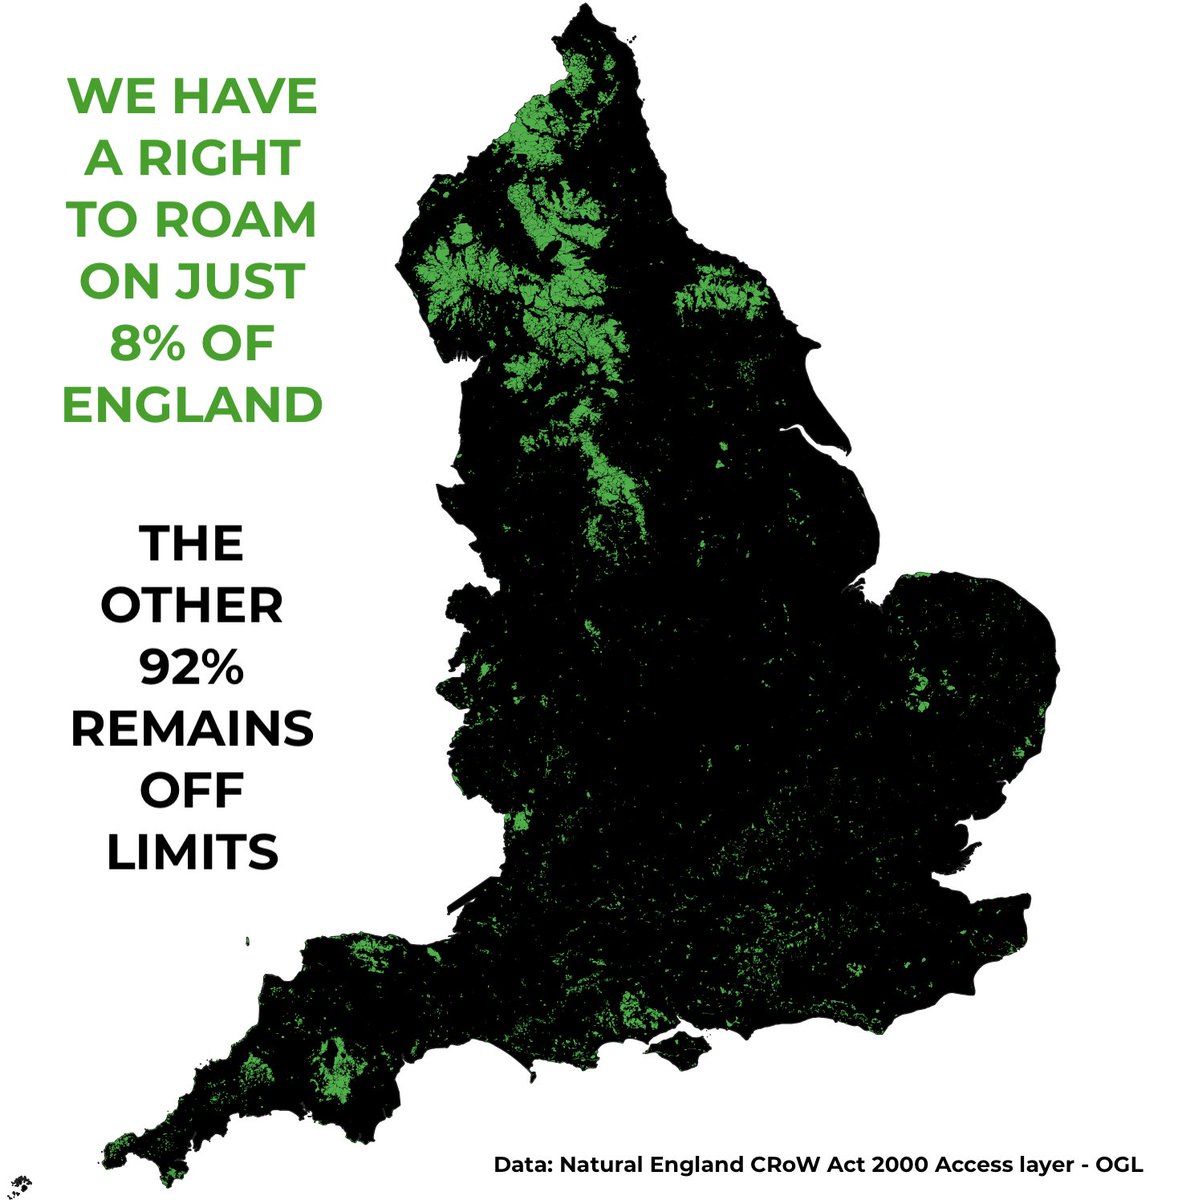 20 years ago today, the Countryside & Rights of Way Act gave us a partial Right to Roam.But it gives us a freedom to roam over just 8% of England.Today over 100 artists, actors & writers call for it to be extended to woods, rivers & Green Belt land: https://www.righttoroam.org.uk/letter 